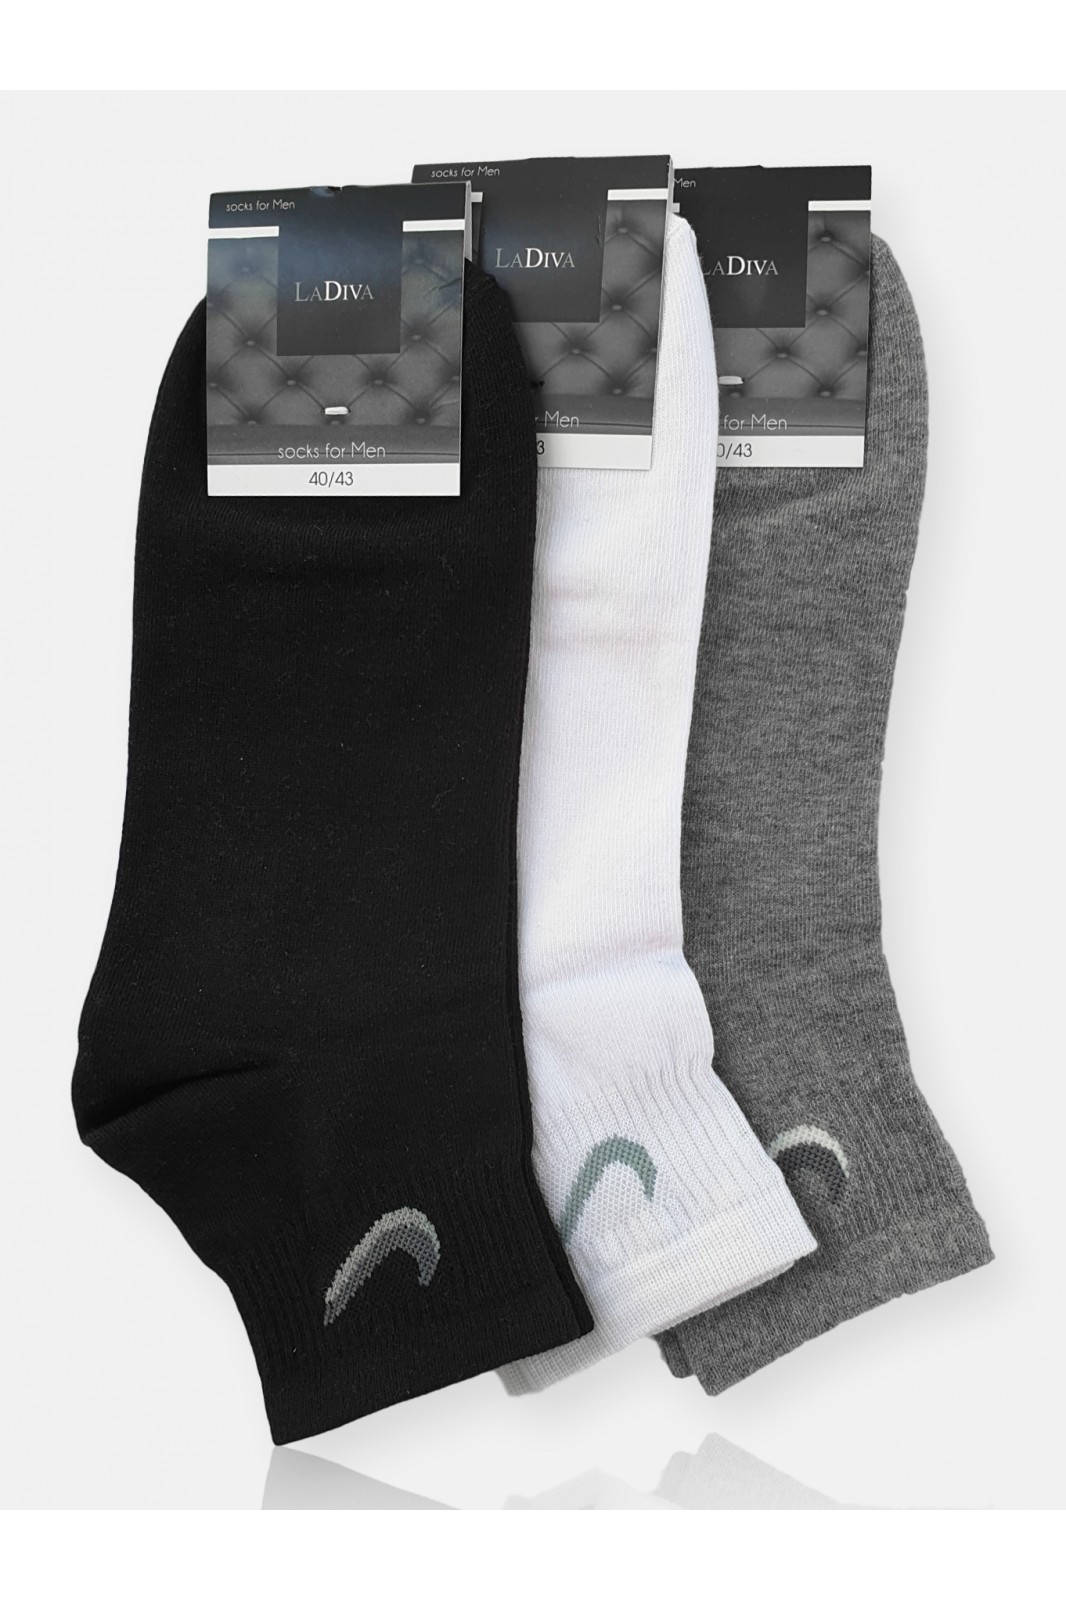 Ankle-high socks Offer 3 Pairs